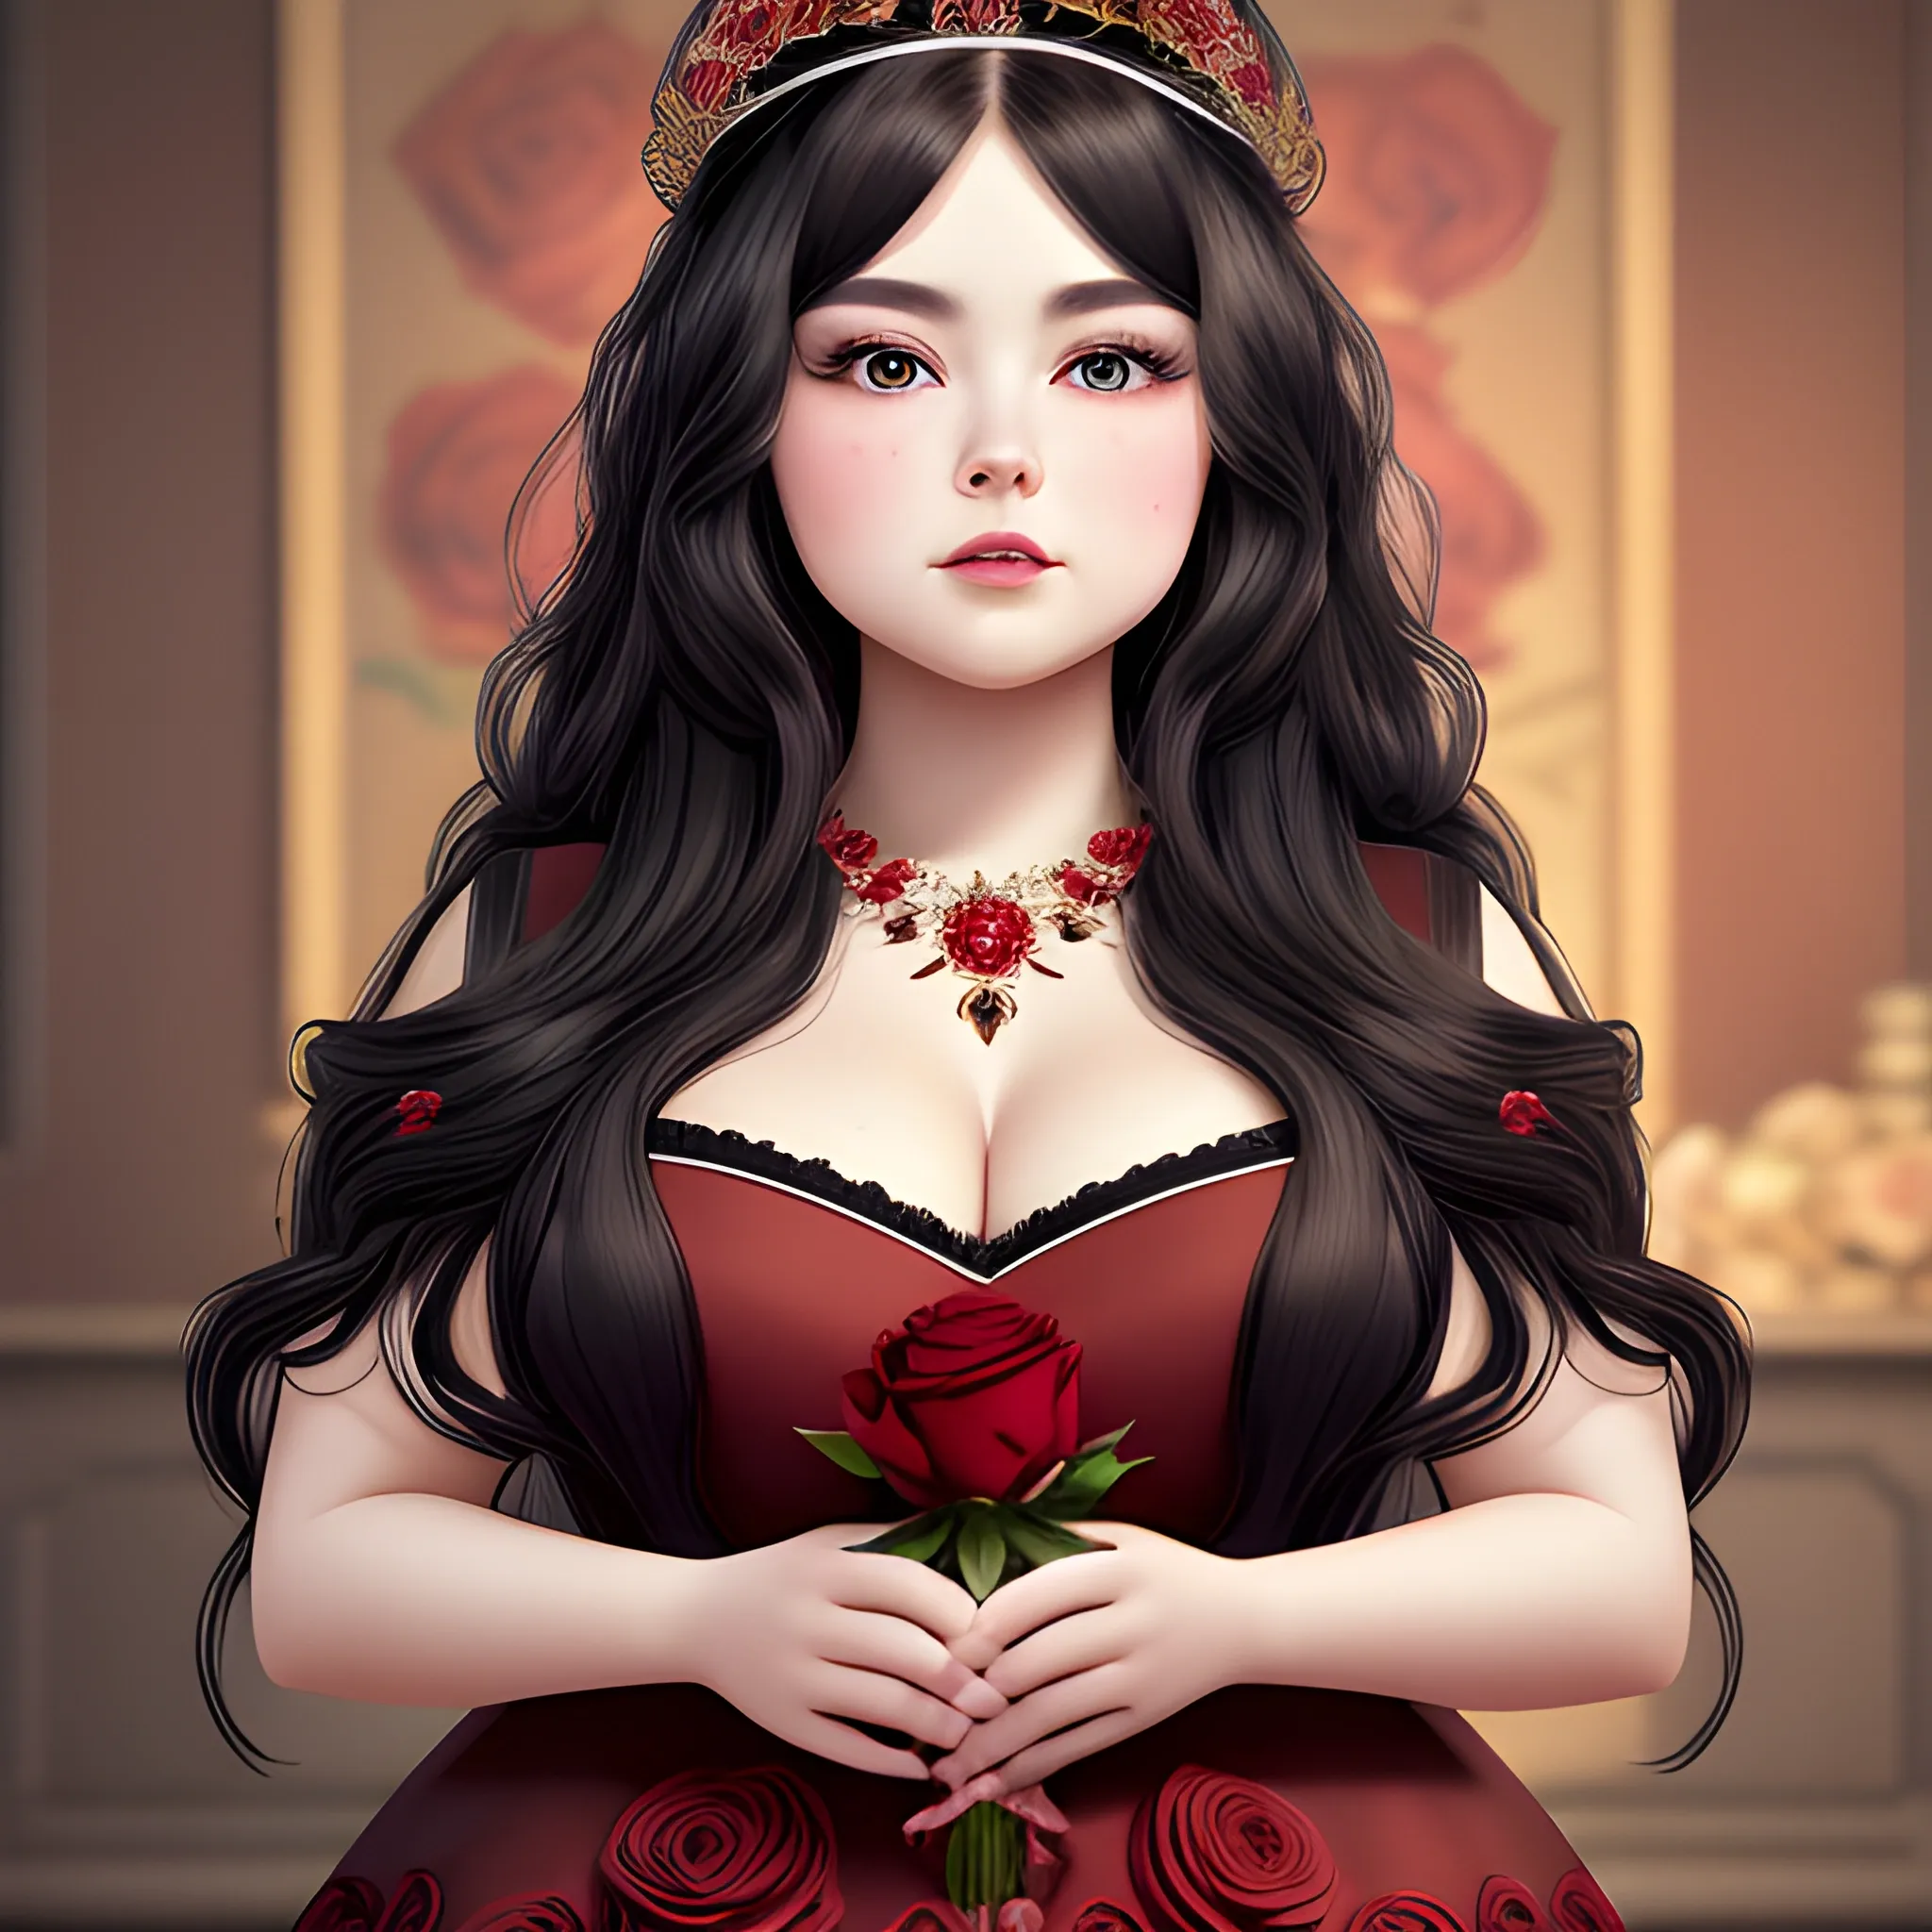 (((high detail))), best quality, Warm Colors, (detailed), (high resolution)Black long-haired female, curvy face, with rosy cheeks, big black eyes, thick eyelashes, thick peach lips, thick eyebrows,  with a black and red dress, roses of backround  
holding a bloody crown in hand, wallper , 